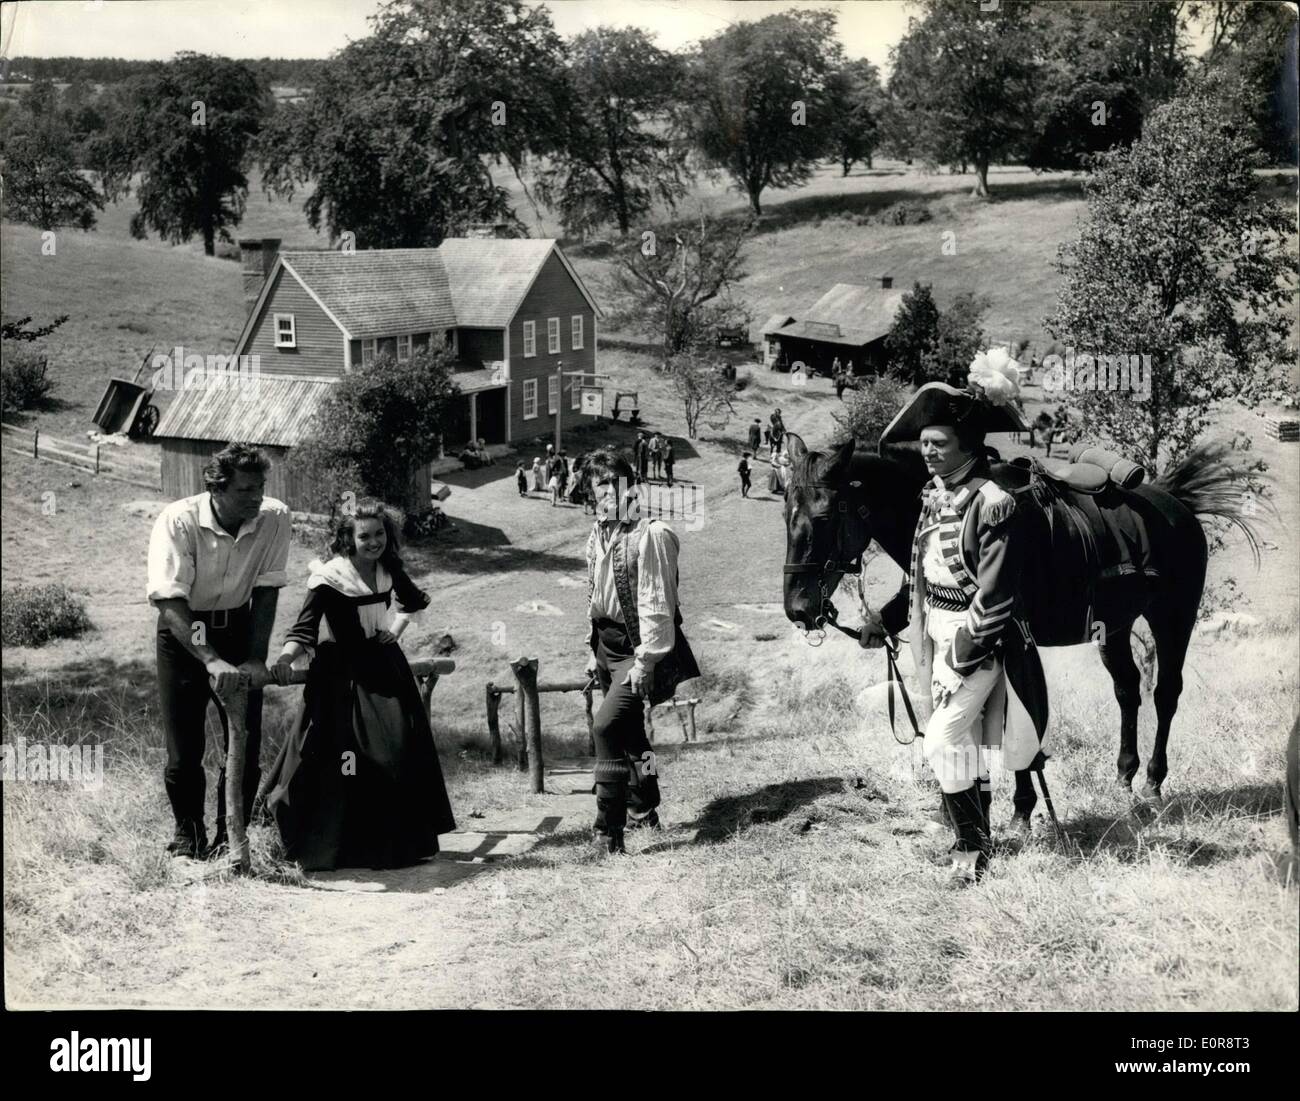 Jul. 07, 1958 - American Village Constructed At Tring Park For Film: Shooting started this morning on ''The Devil's Disciple'' - the Bernard Shaw satire on the American War of Independence - at Tring Park, Herts.- The American village of Westerbridge has been constructed in the park as a background for the film which stars. Sir Laurence Olivier - Burt Lancaster - Janette Scott, etc. Photo shows General view of the village - with on the hillside the four stars of the film - L-R:- Burt Lancaster (Rev Stock Photo